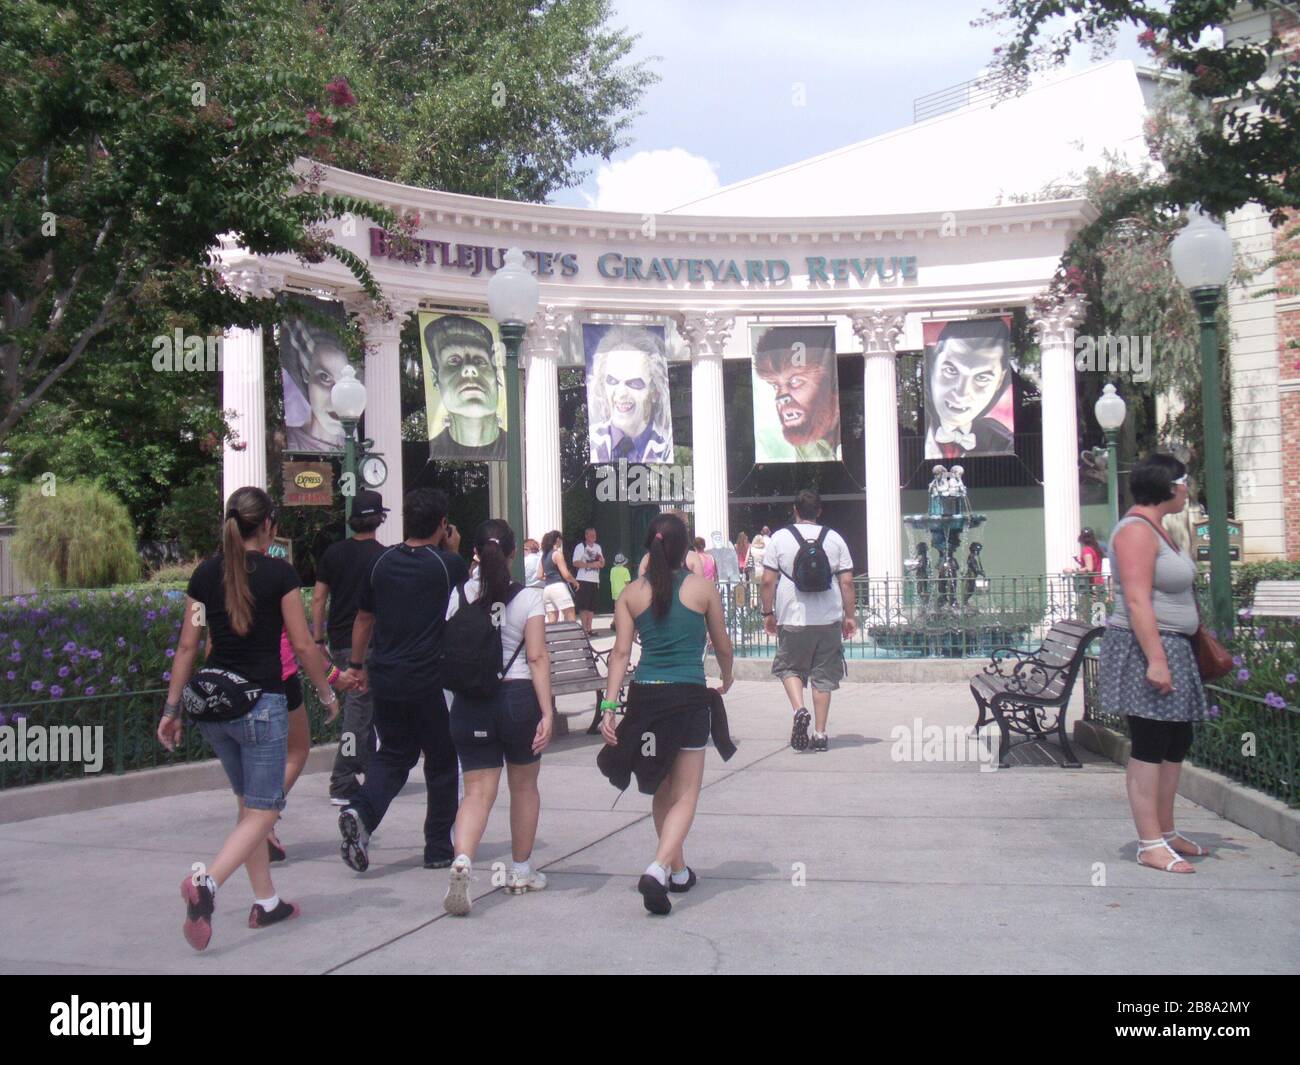 English Entrance To Beetlejuice S Rock And Roll Graveyard Revue At Universal Studios Florida 10 September 10